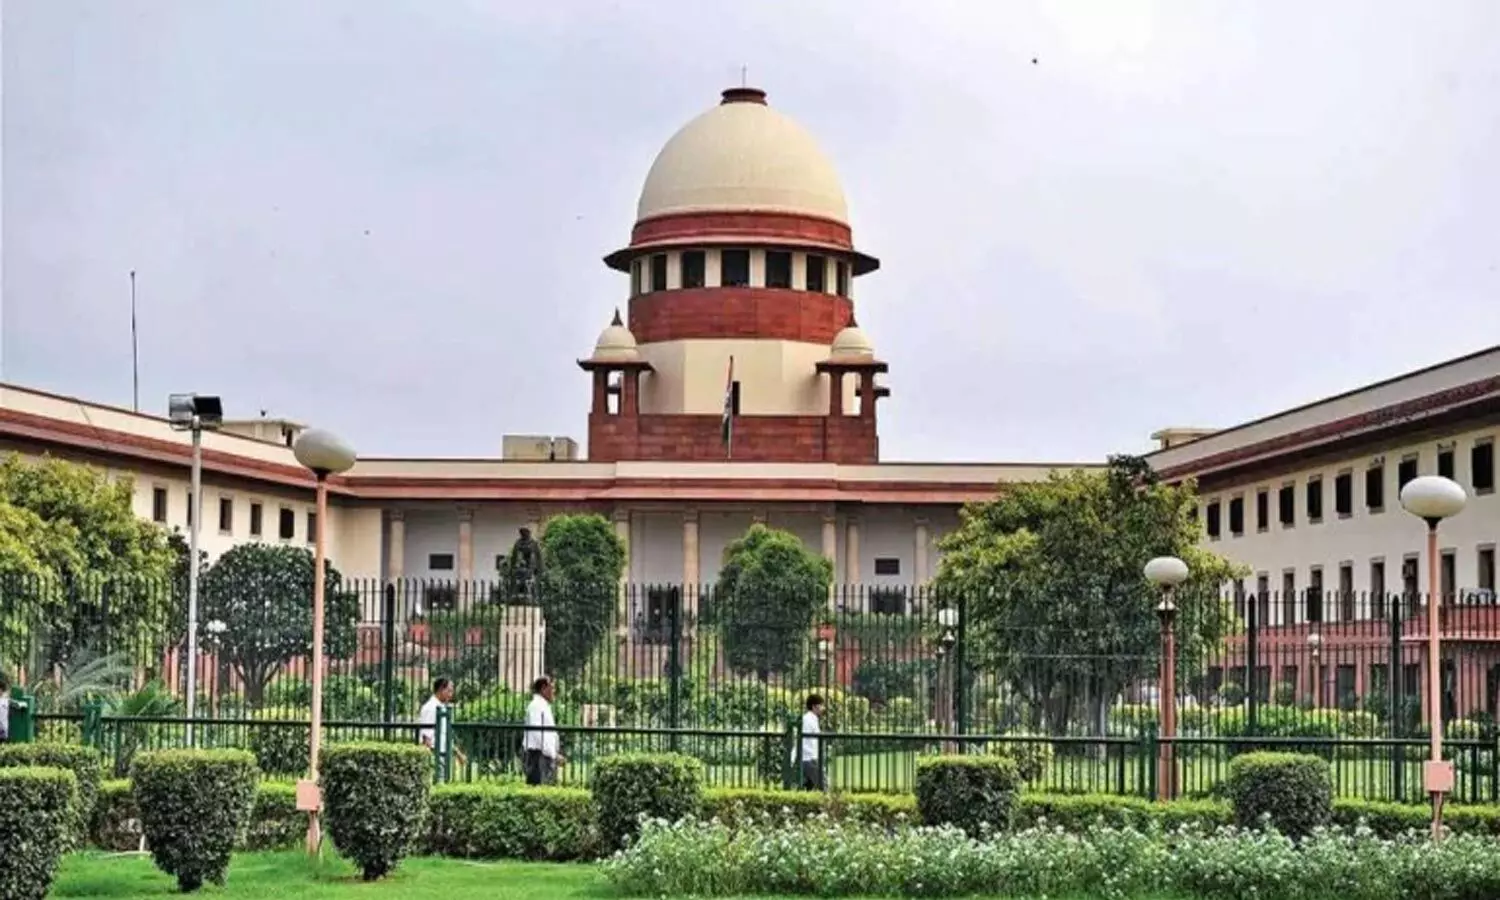 Make-shift hospitals will have to be built in near future: Centre tells SC